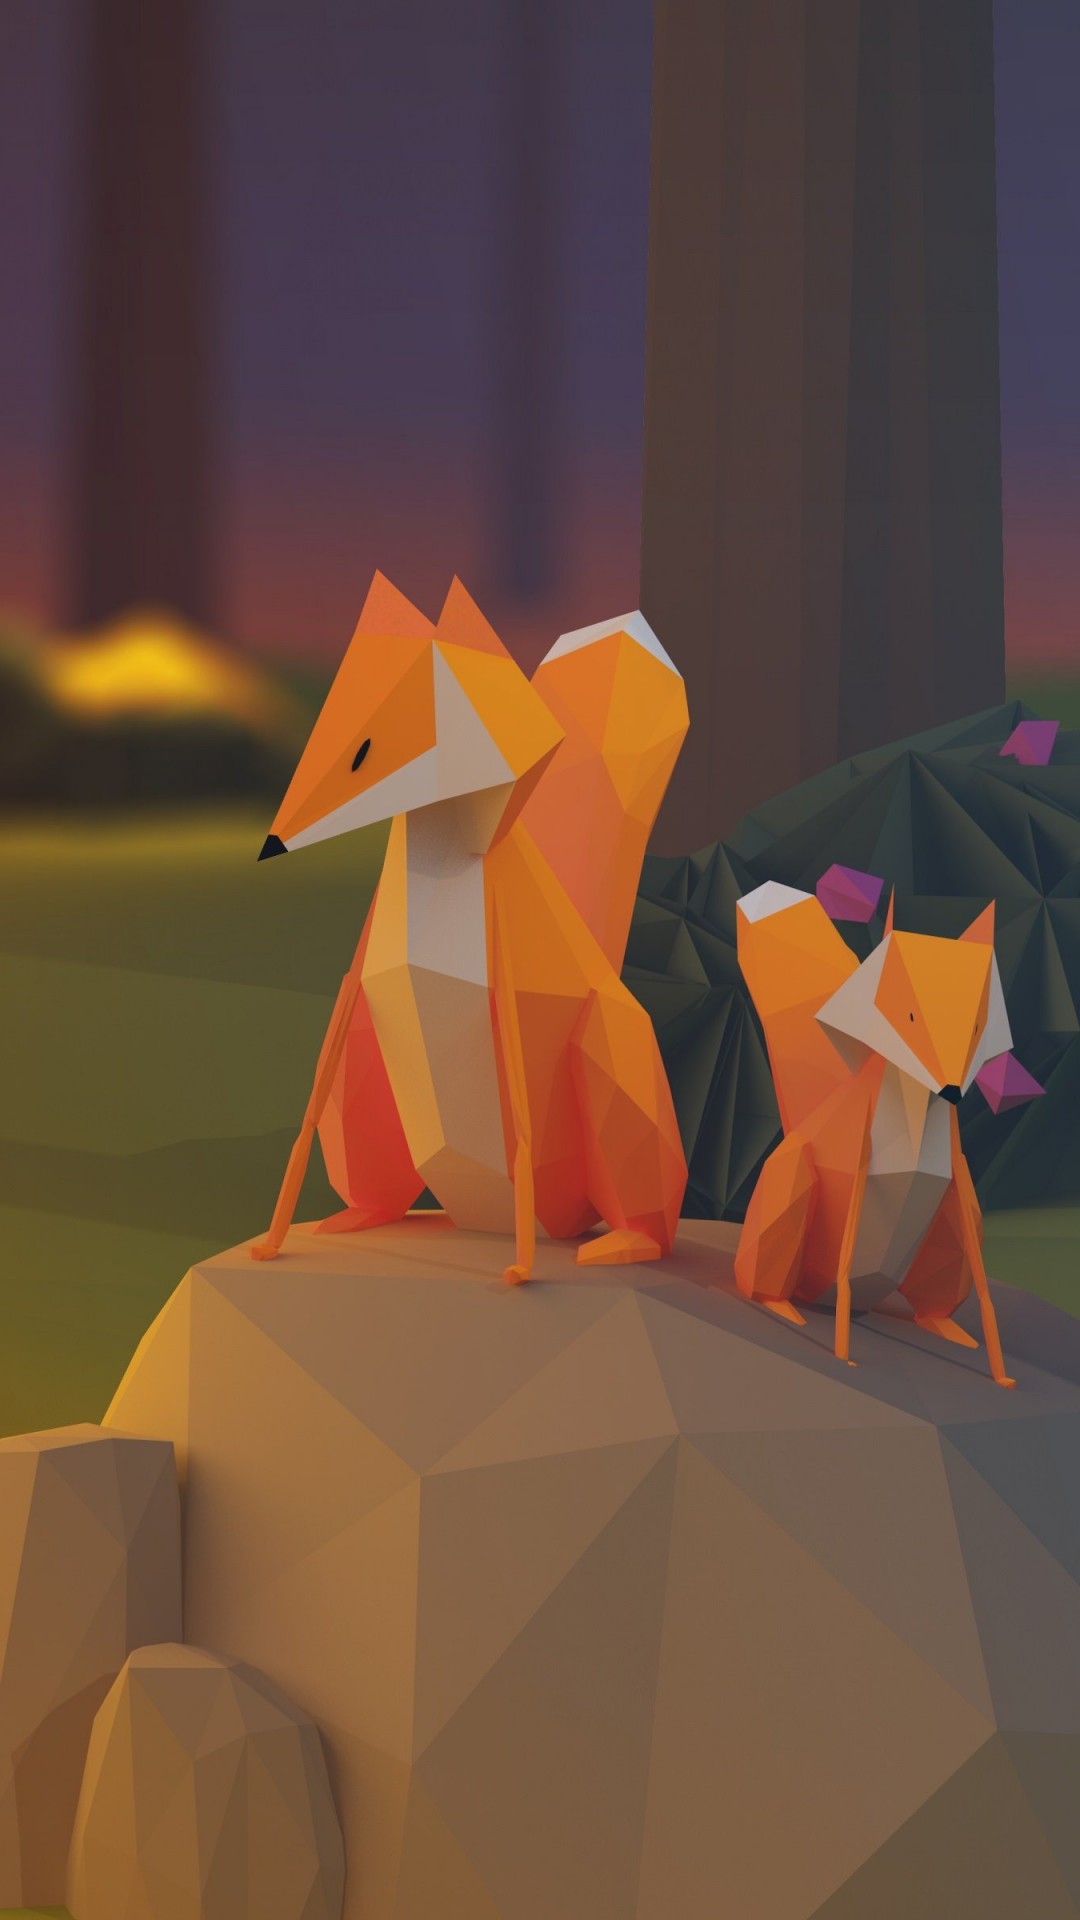 Low Poly Foxes Wallpaper for SAMSUNG Galaxy S4